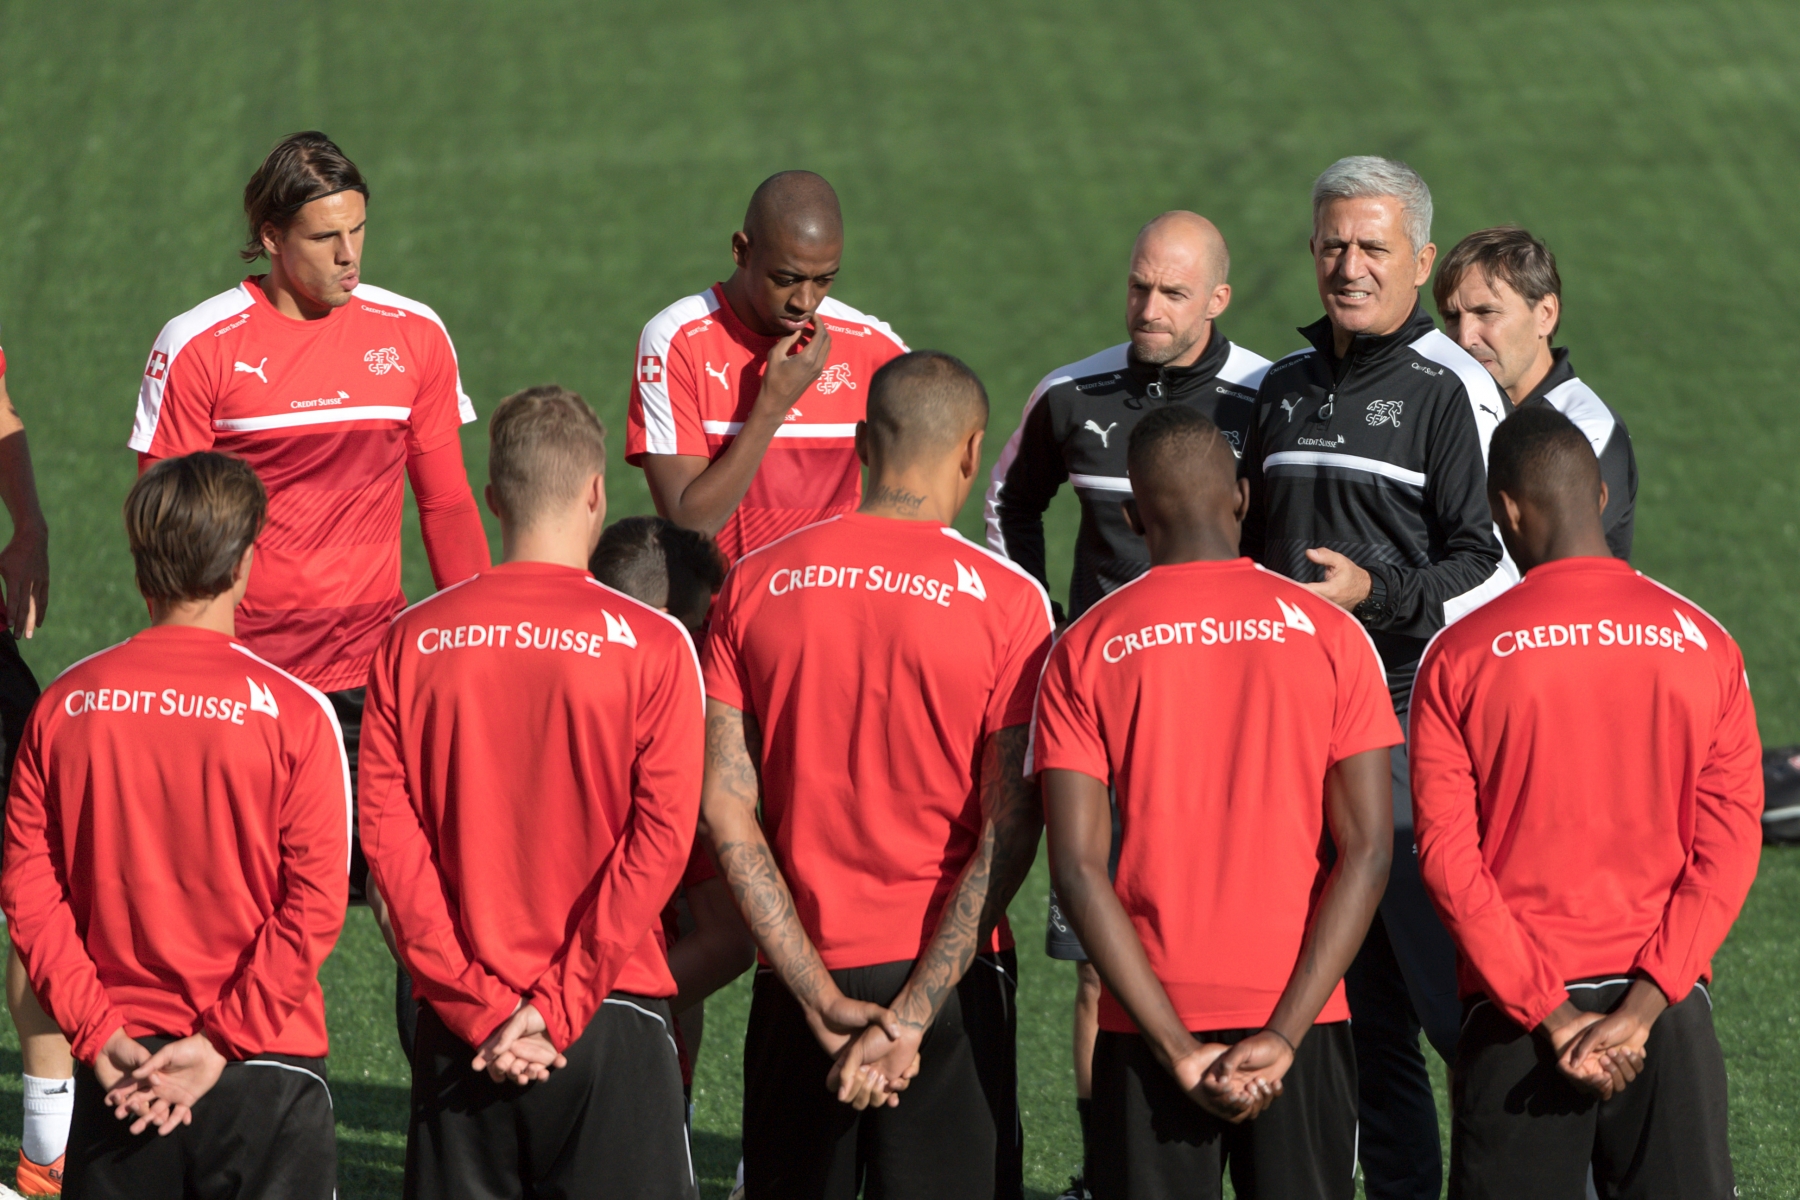 Vladimir Petkovic, back right, head coach of Switzerland's national soccer team, during a training session in the Estadi Nacional in Andorra La Vella, Andorra, on Sunday, October 9, 2016. Switzerland is scheduled to play a 2018 Fifa World Cup Russia group B qualification soccer match against Andorra on Monday, October 10, 2016. (KEYSTONE/Georgios Kefalas) FUSSBALL WM 2018 QUALIFIKATION TEAM SCHWEIZ TRAINING